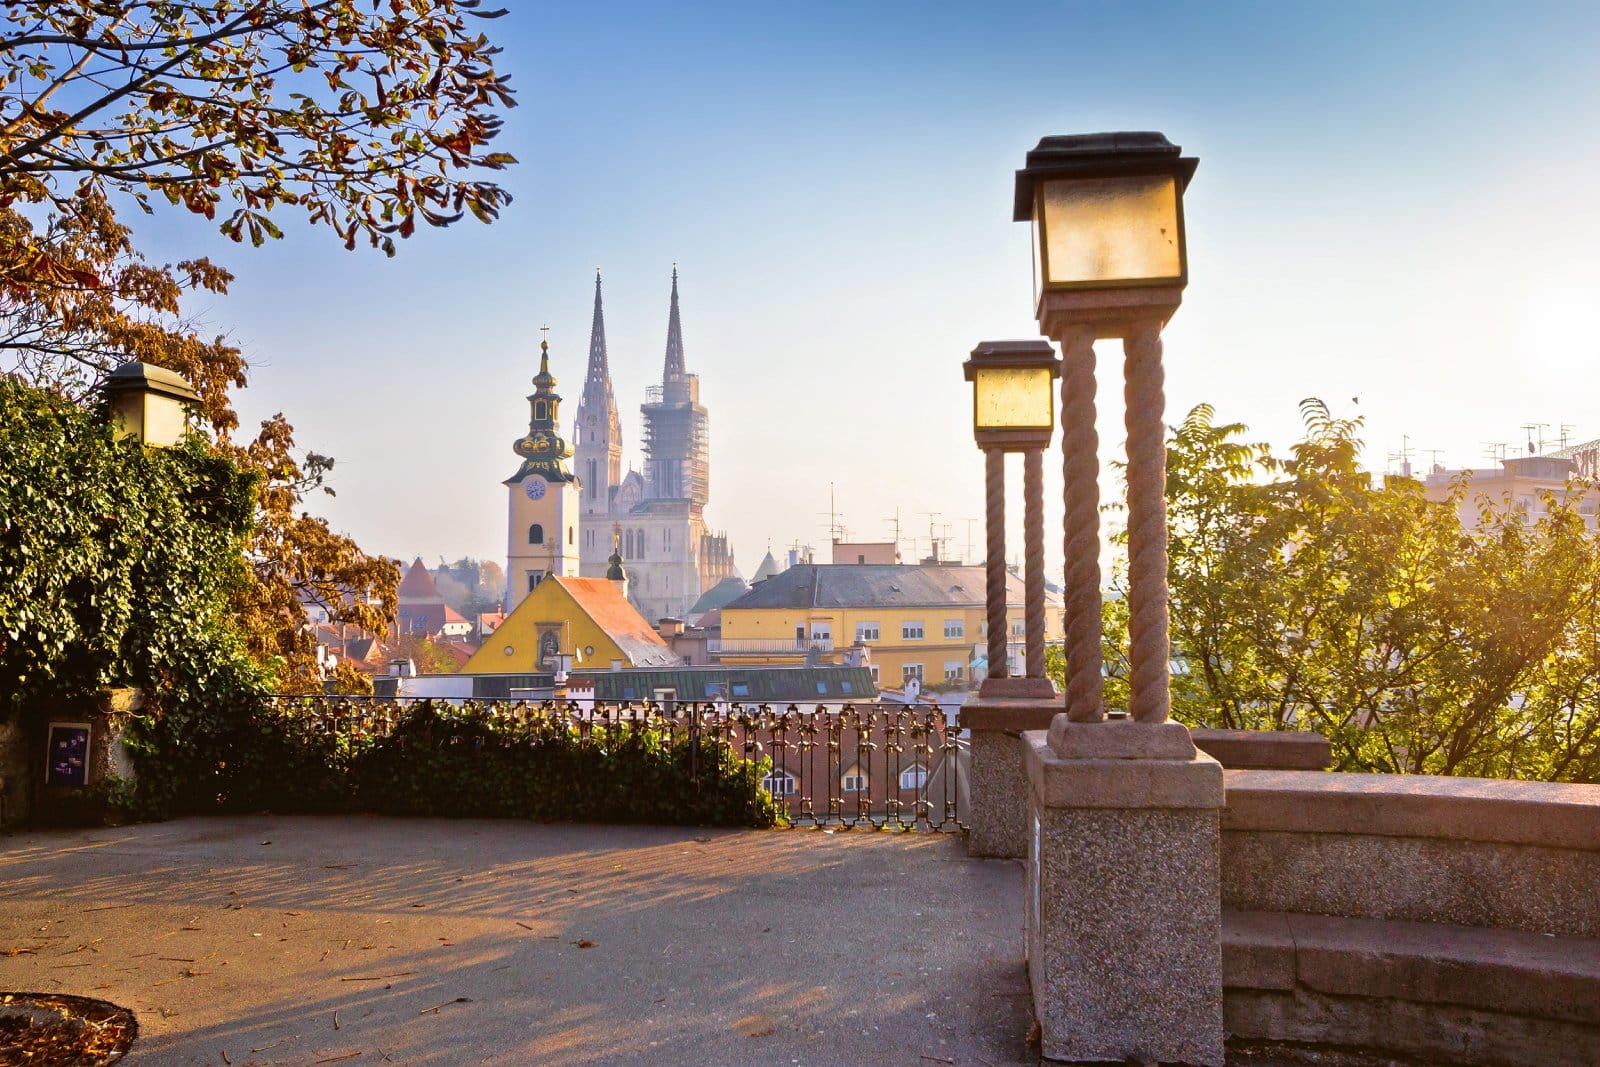 <p class="wp-caption-text">Image Credit: Shutterstock / xbrchx</p>  <p>Zagreb is an affordable alternative to Croatia’s coastal destinations, offering rich cultural experiences, museums, and inexpensive dining.</p>